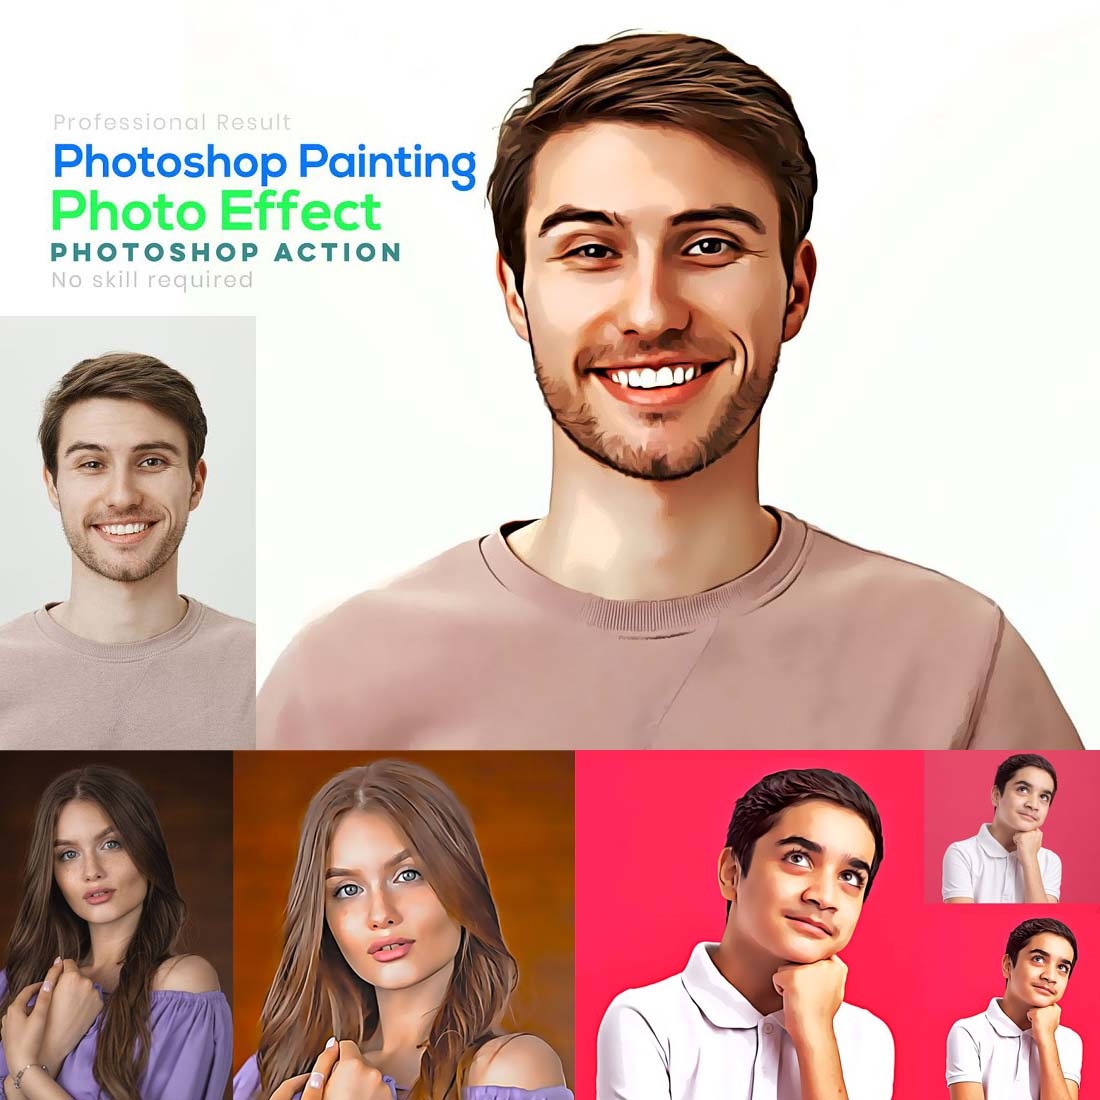 Photoshop Painting Effect cover image.